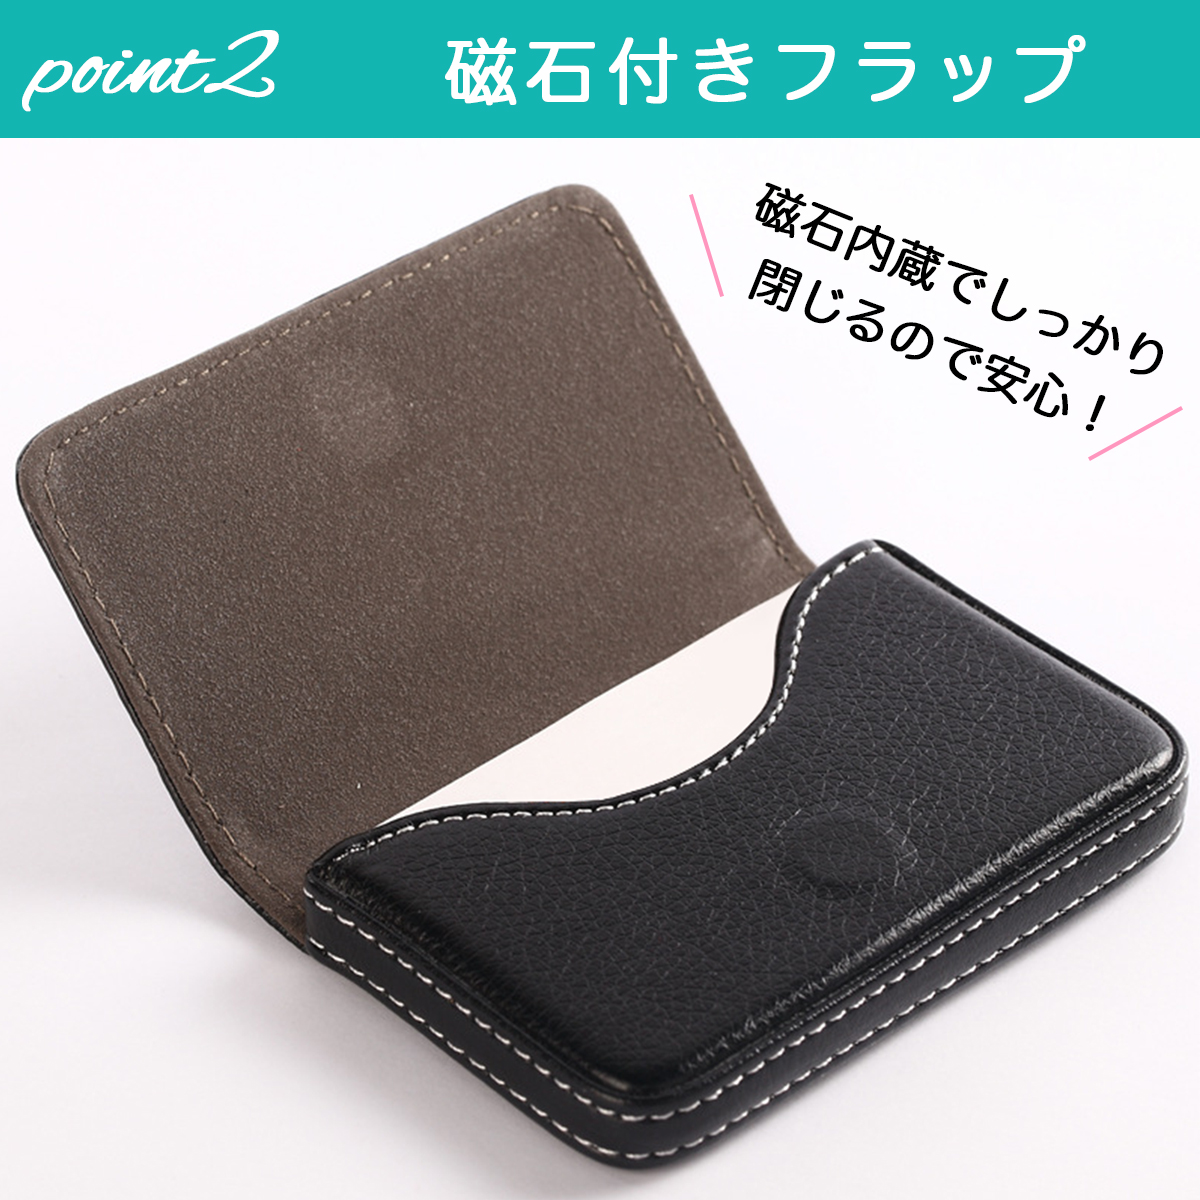  card-case card-case business card case stylish thin type lady's men's simple soft leather compound cow leather 